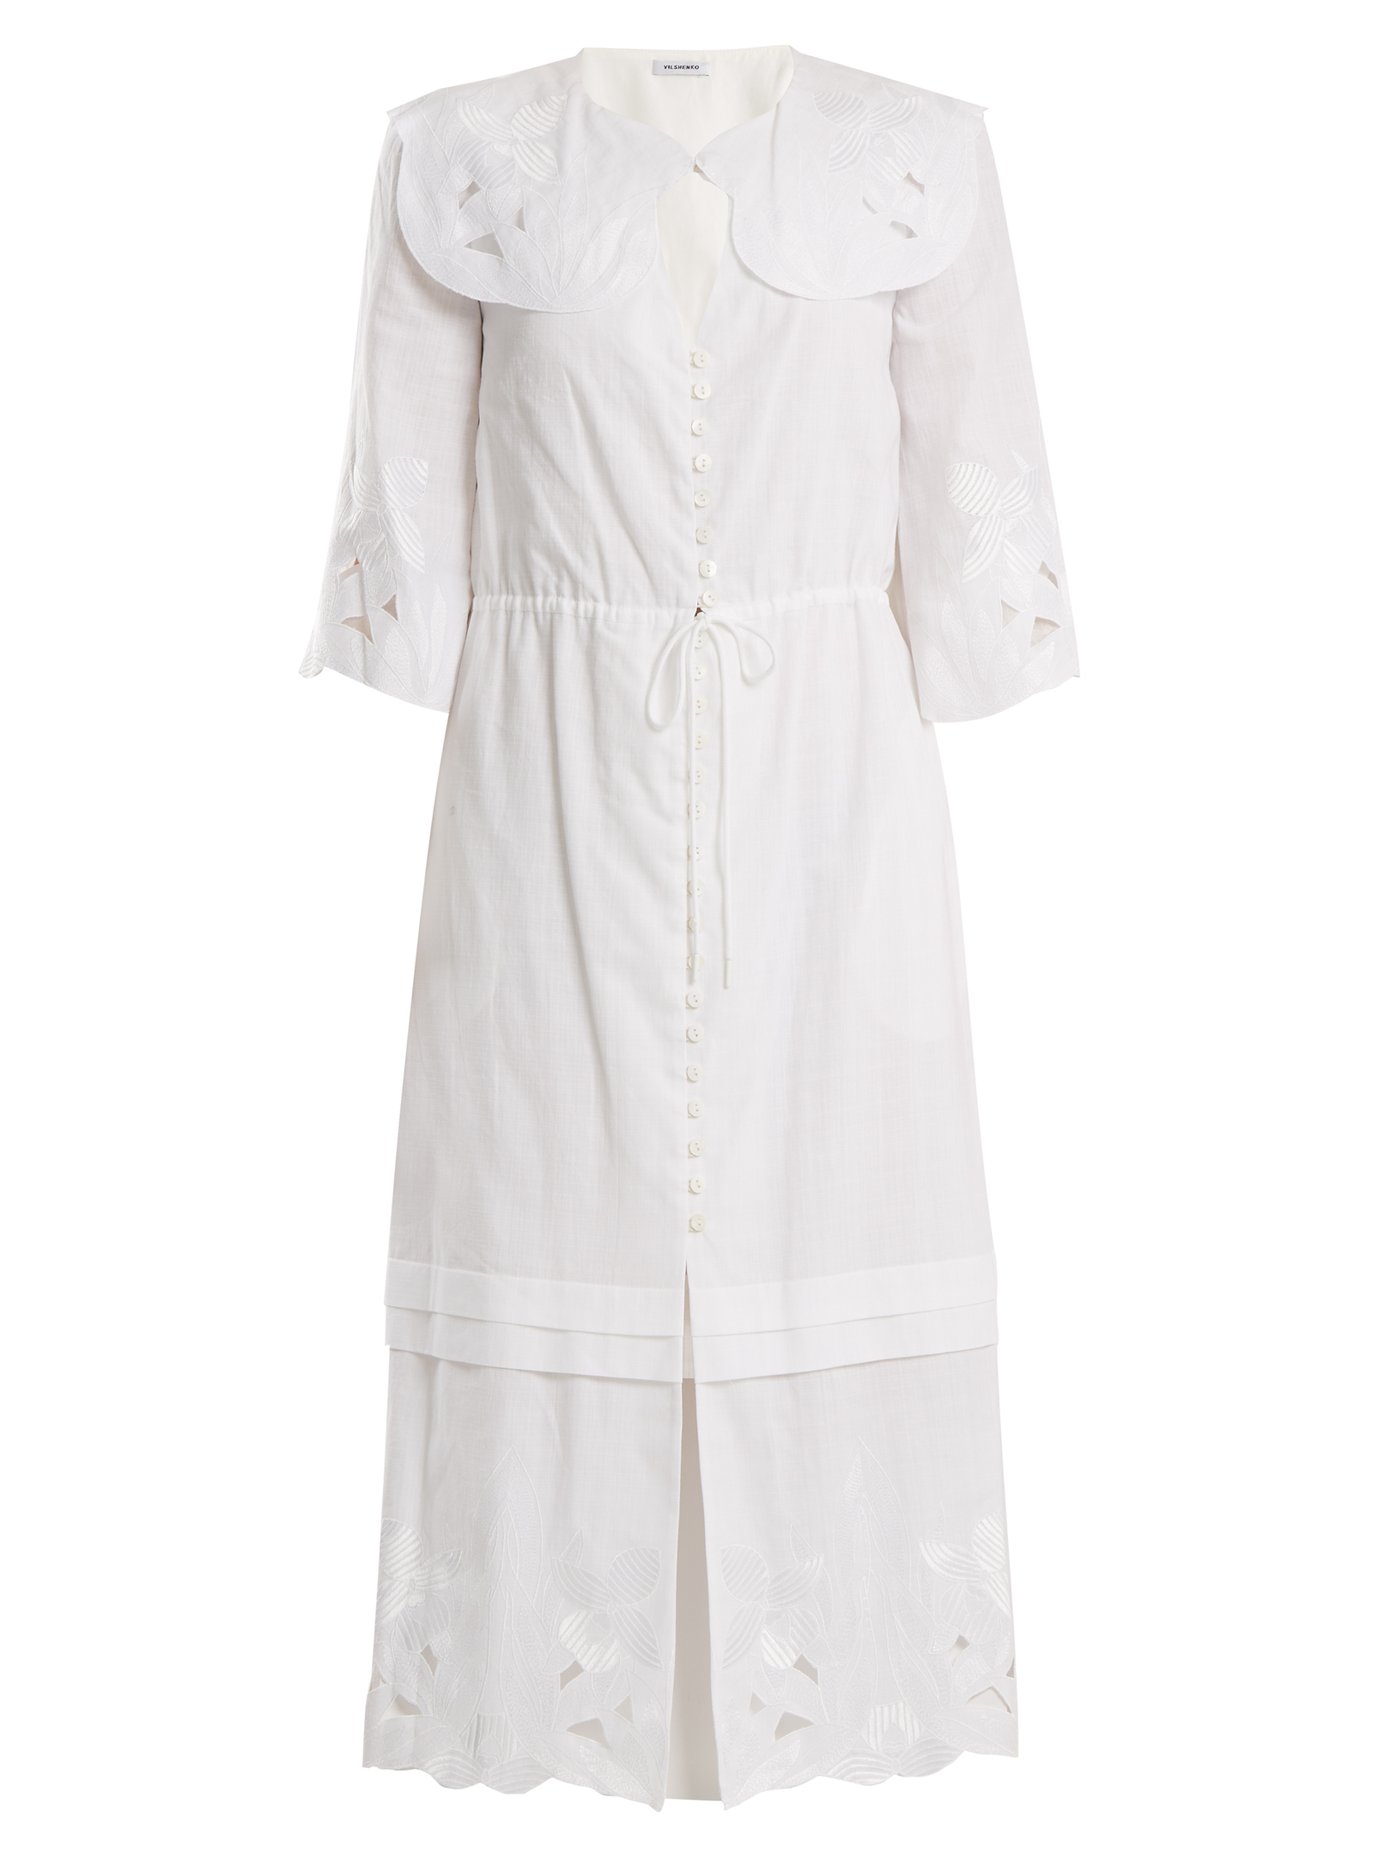 cotton dresses with sleeves uk